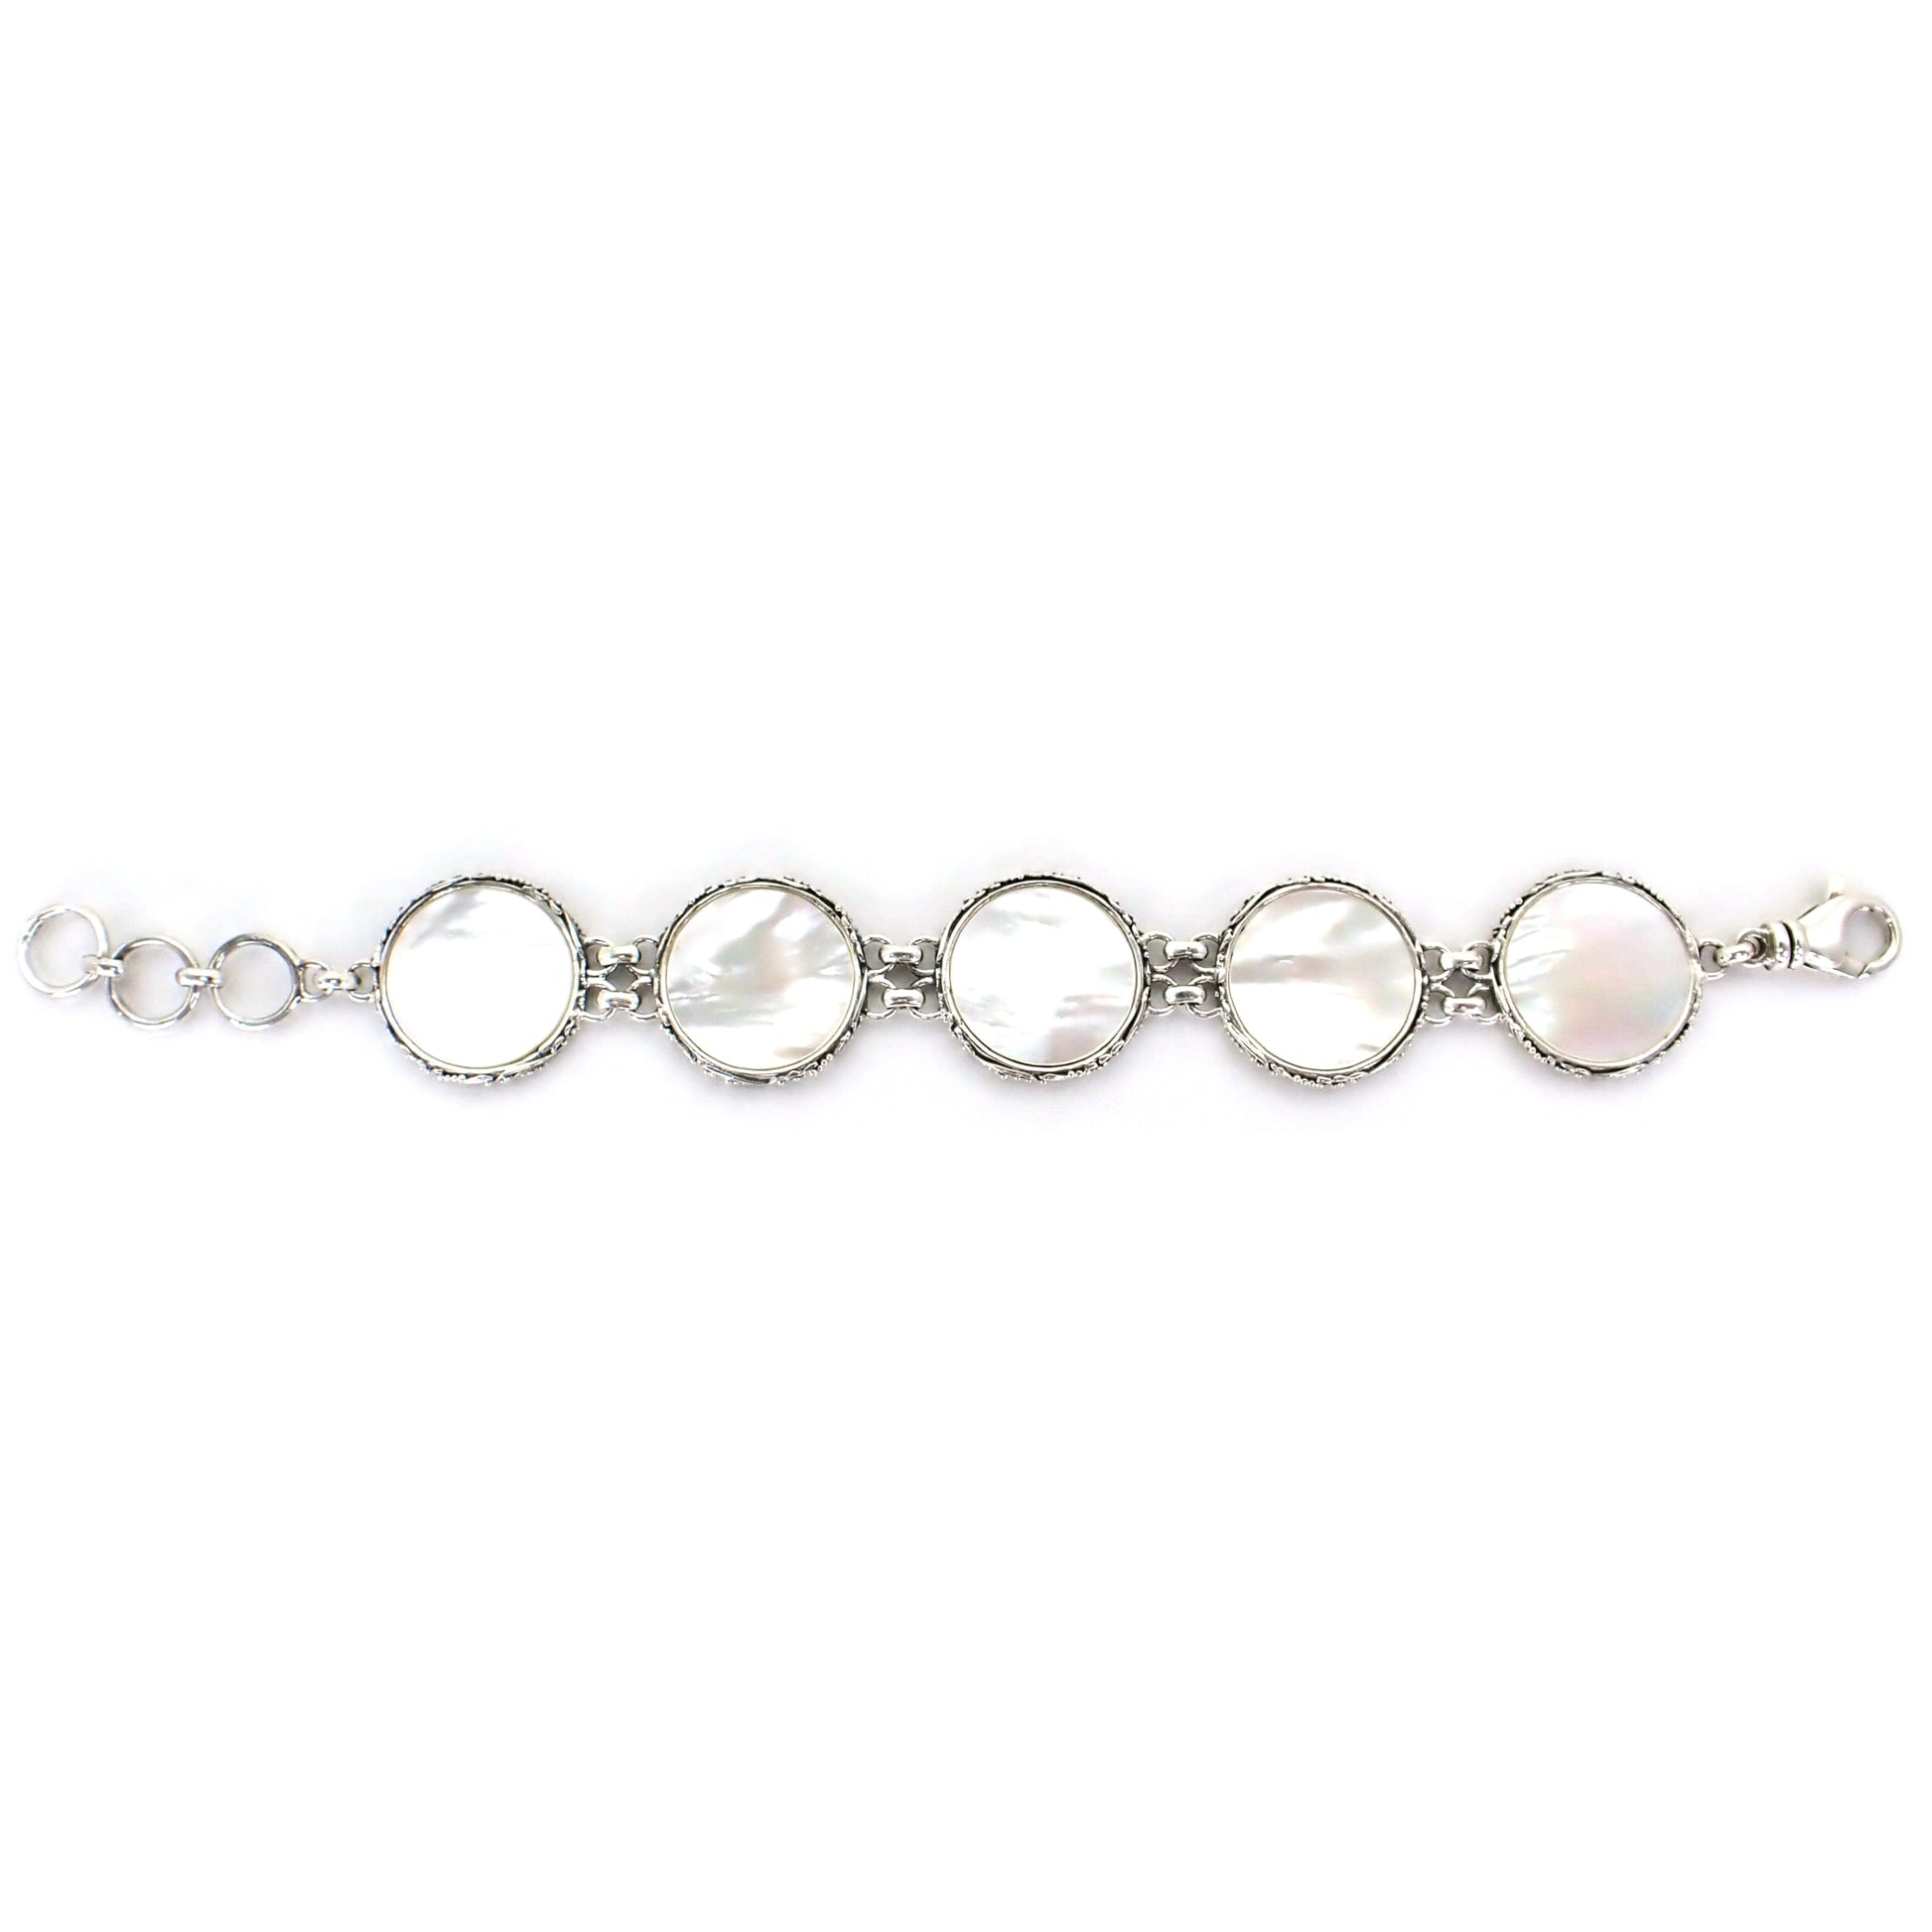 Bracelet laid out flat made of five round links, each with a mother of pearl disc and ornate silver border.